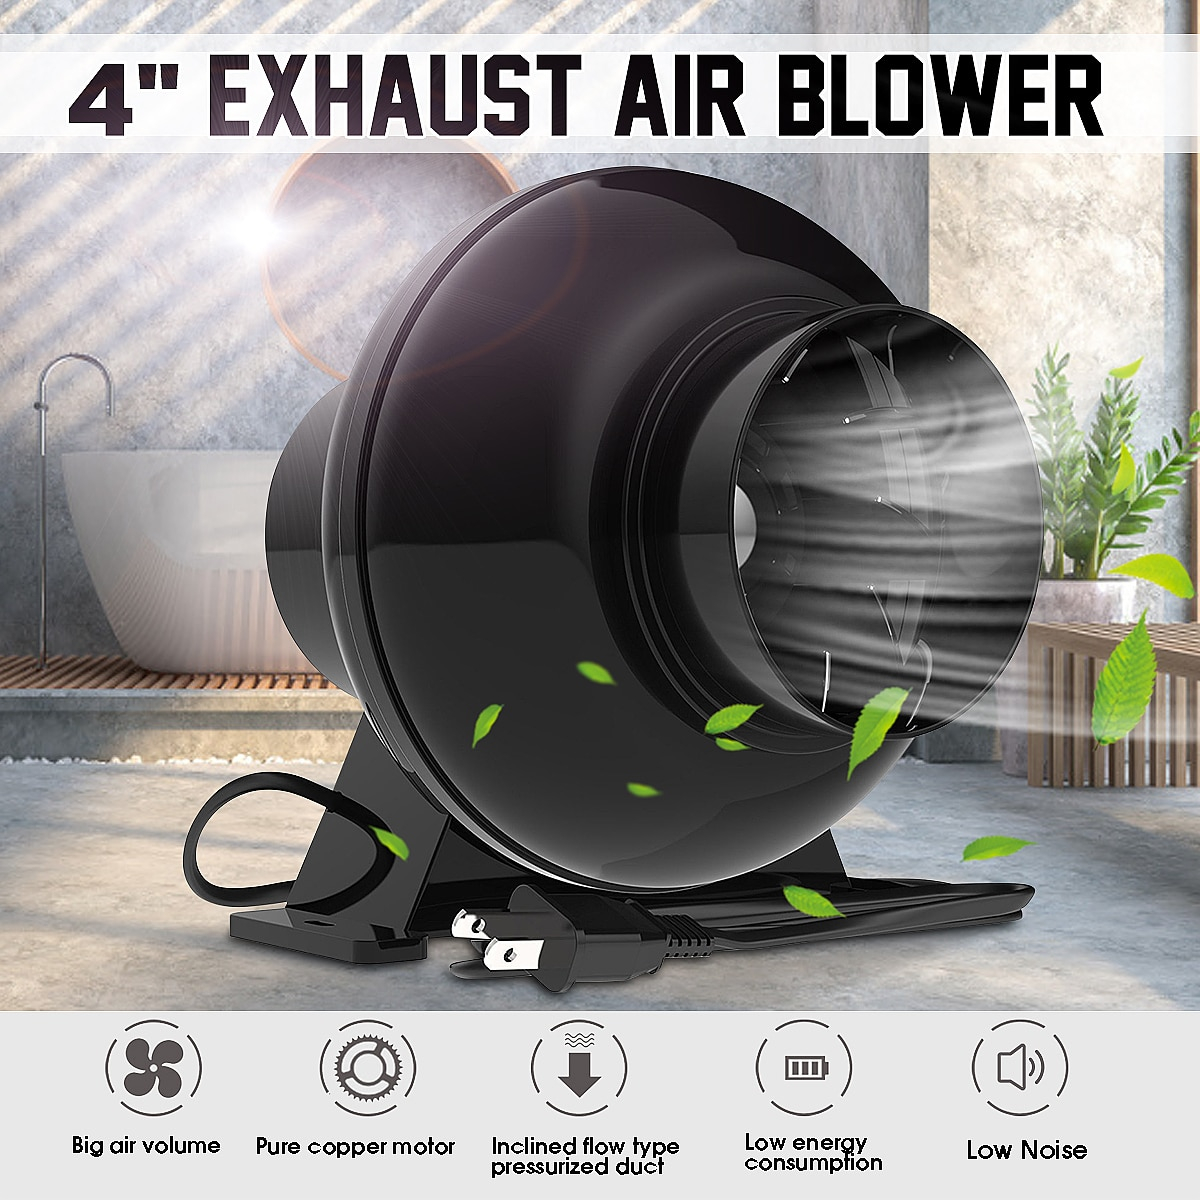 Us 2846 46 Off4 Inch Exhaust Fan 220v Inline Duct Extractor Air Booster Fan Ventilation Exhaust Air Blower Wall Ventilator Fan Home within size 1200 X 1200